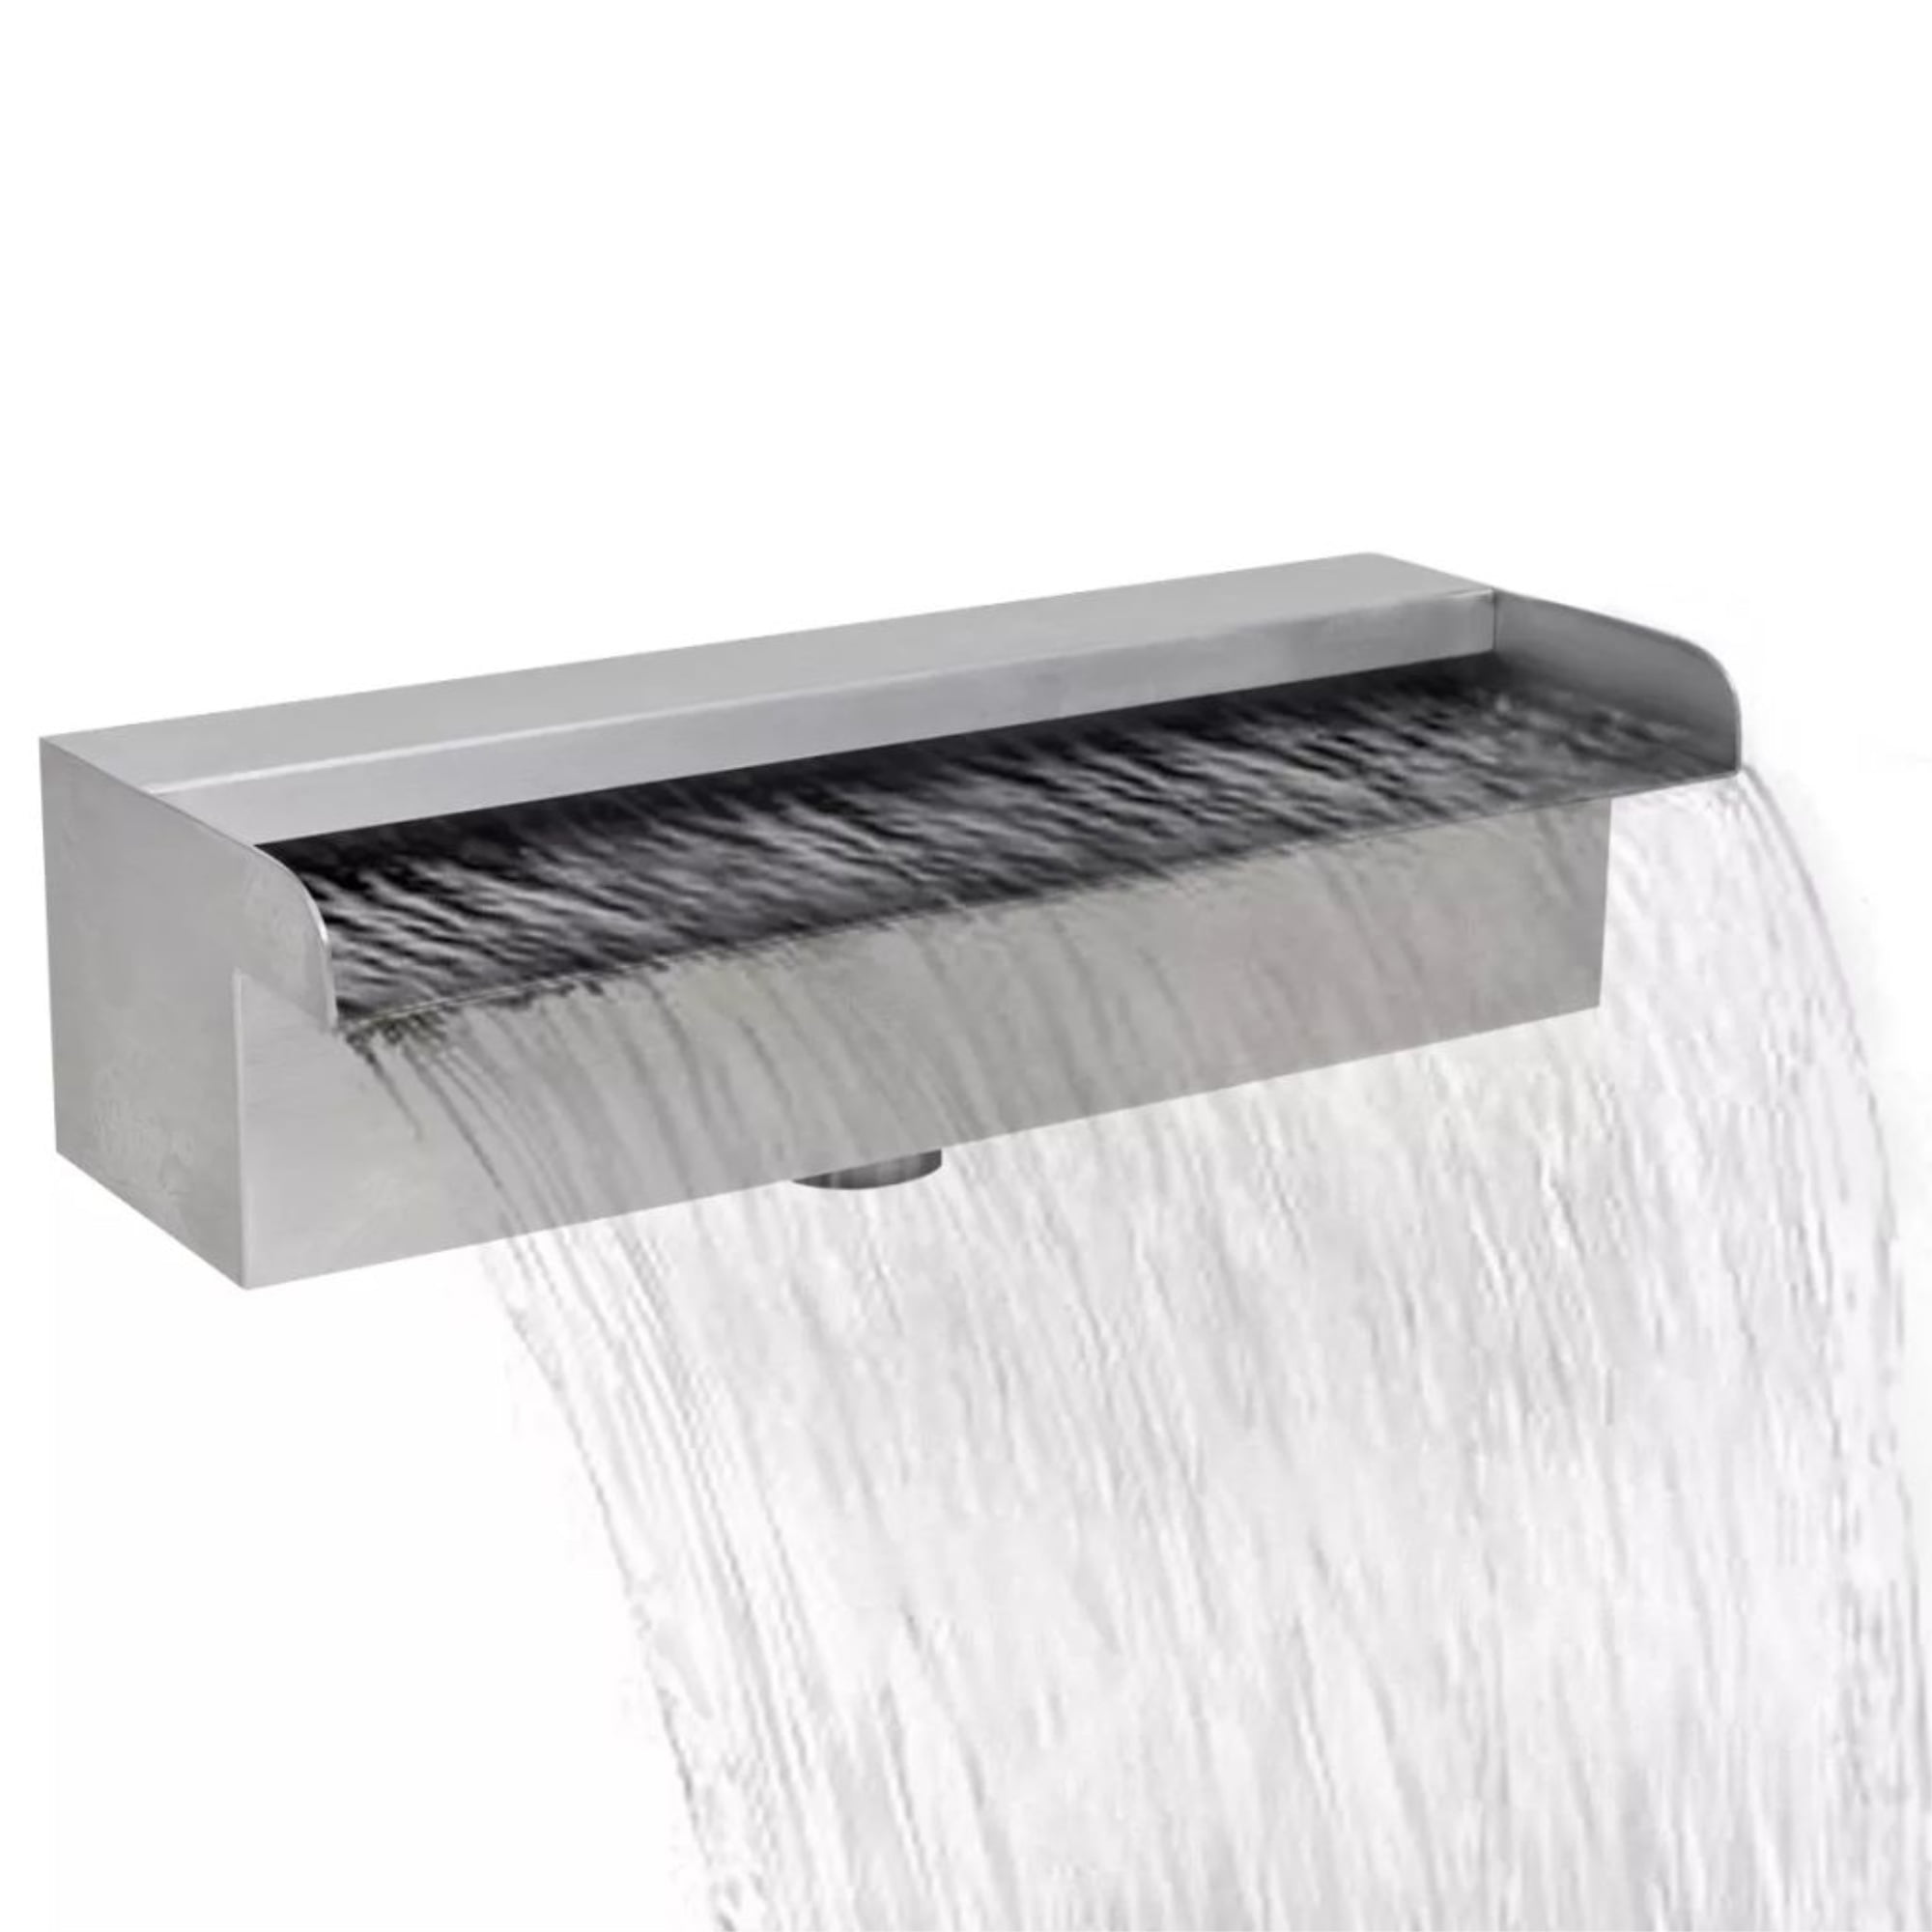 Details about   Garden Outdoor Waterfall Pool Fountain Stainless Steel Rectangular 11.8"-59"